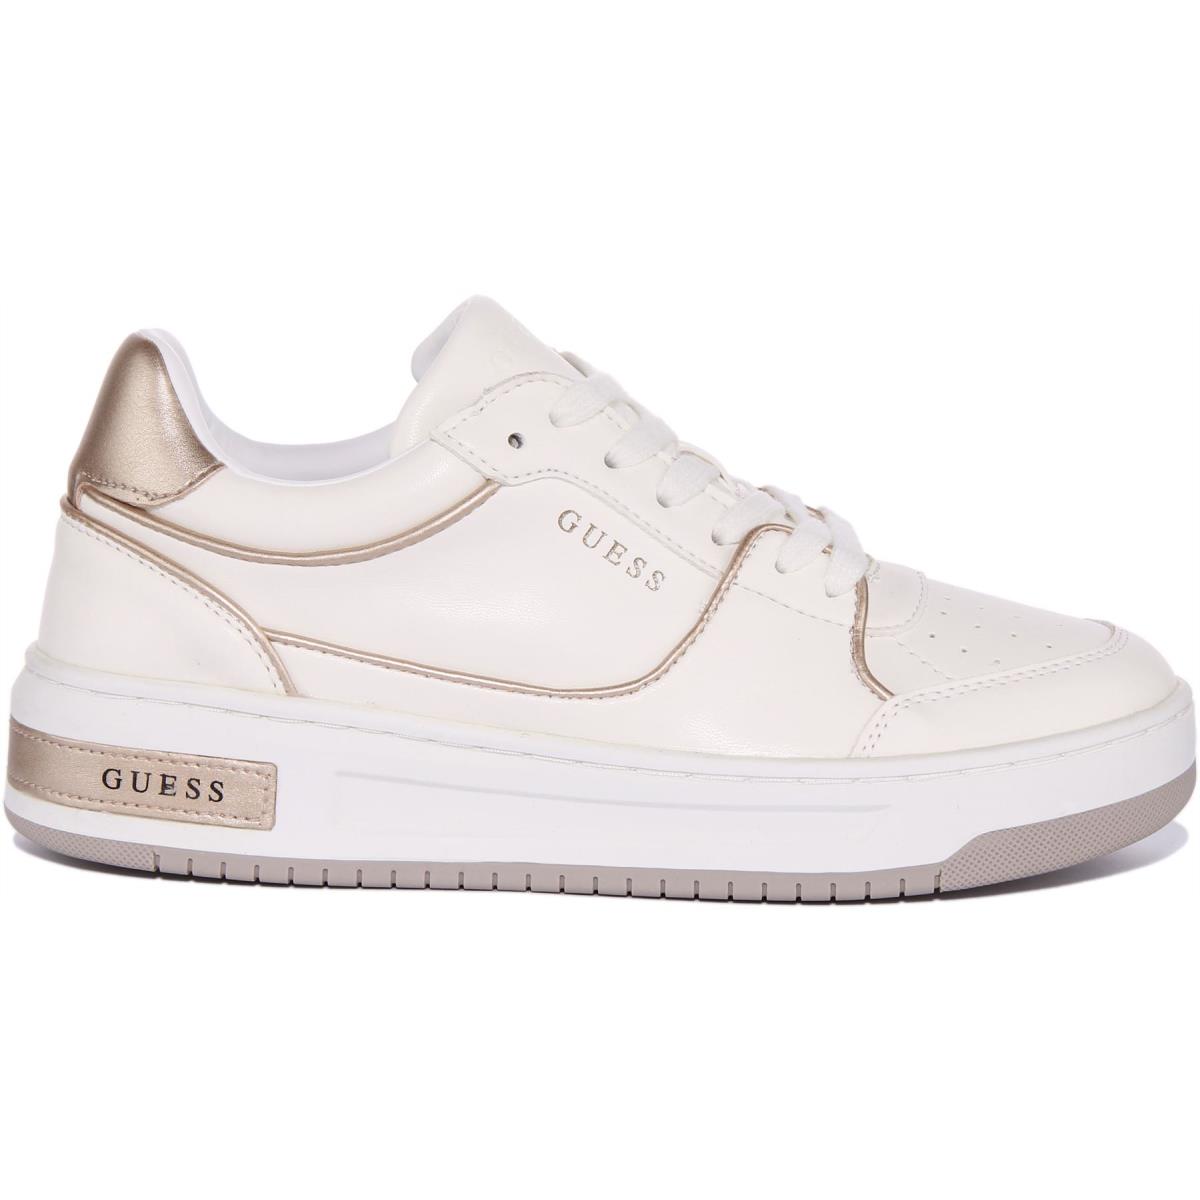 Guess Fl8Tkysma12 Tokyo Womens Lace Up Sneakers In White Gold Size US 5 - 11